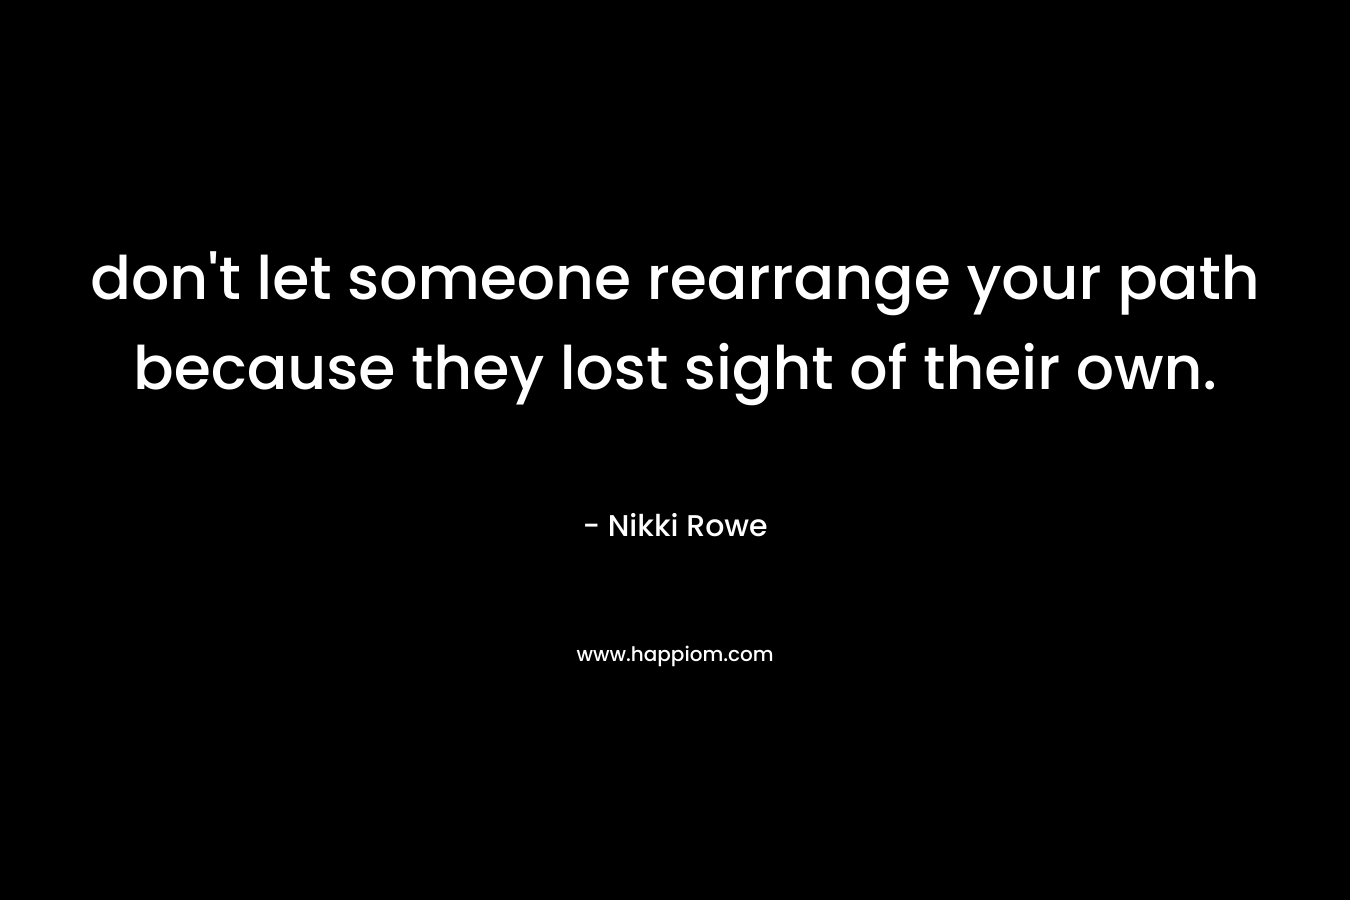 don't let someone rearrange your path because they lost sight of their own.